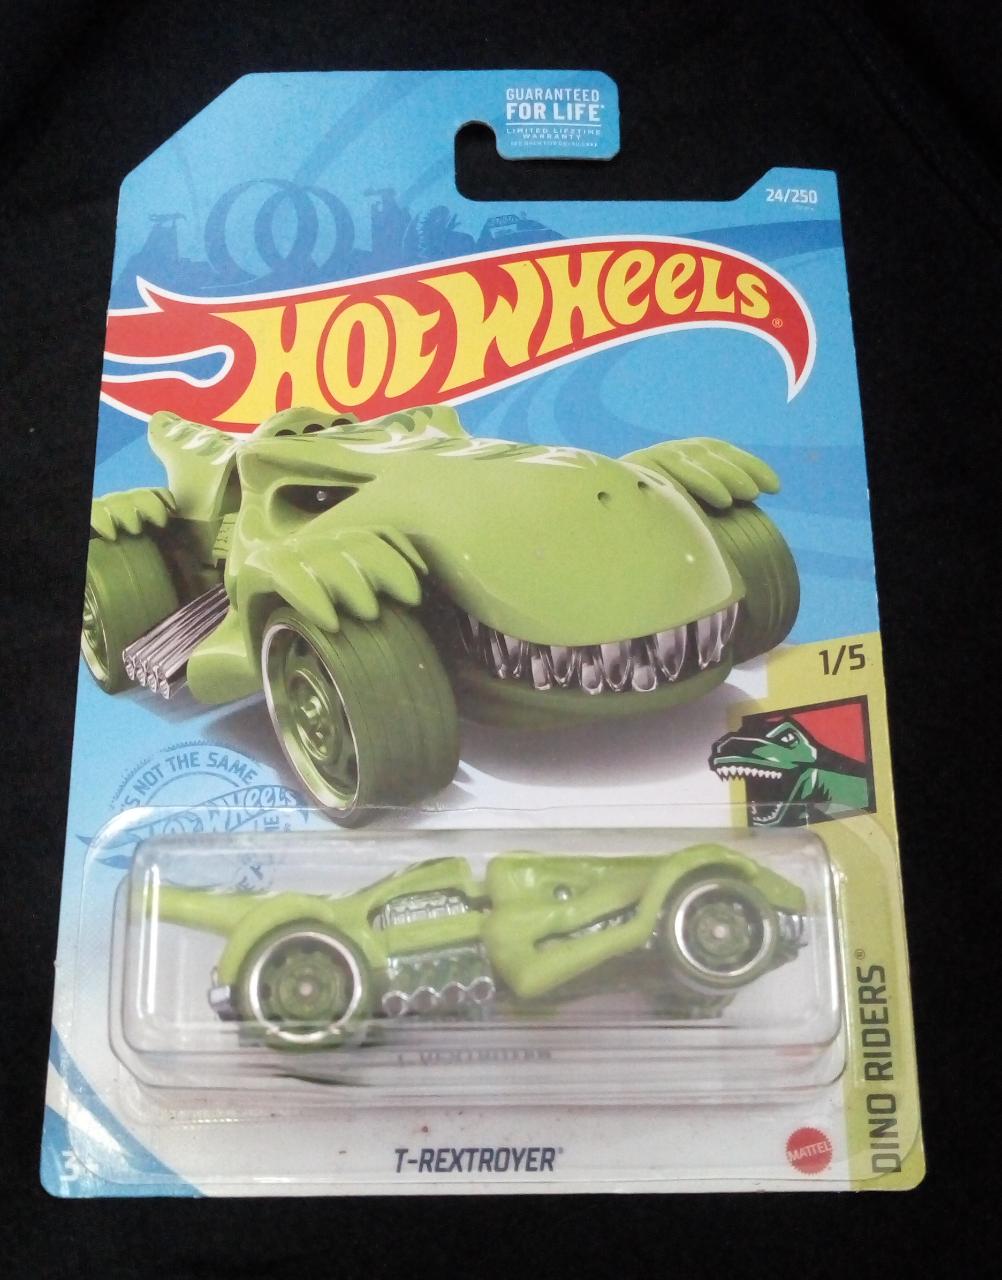 Hot Wheels T Rextroyer, [Green] 24/250 Dino Riders 1/5